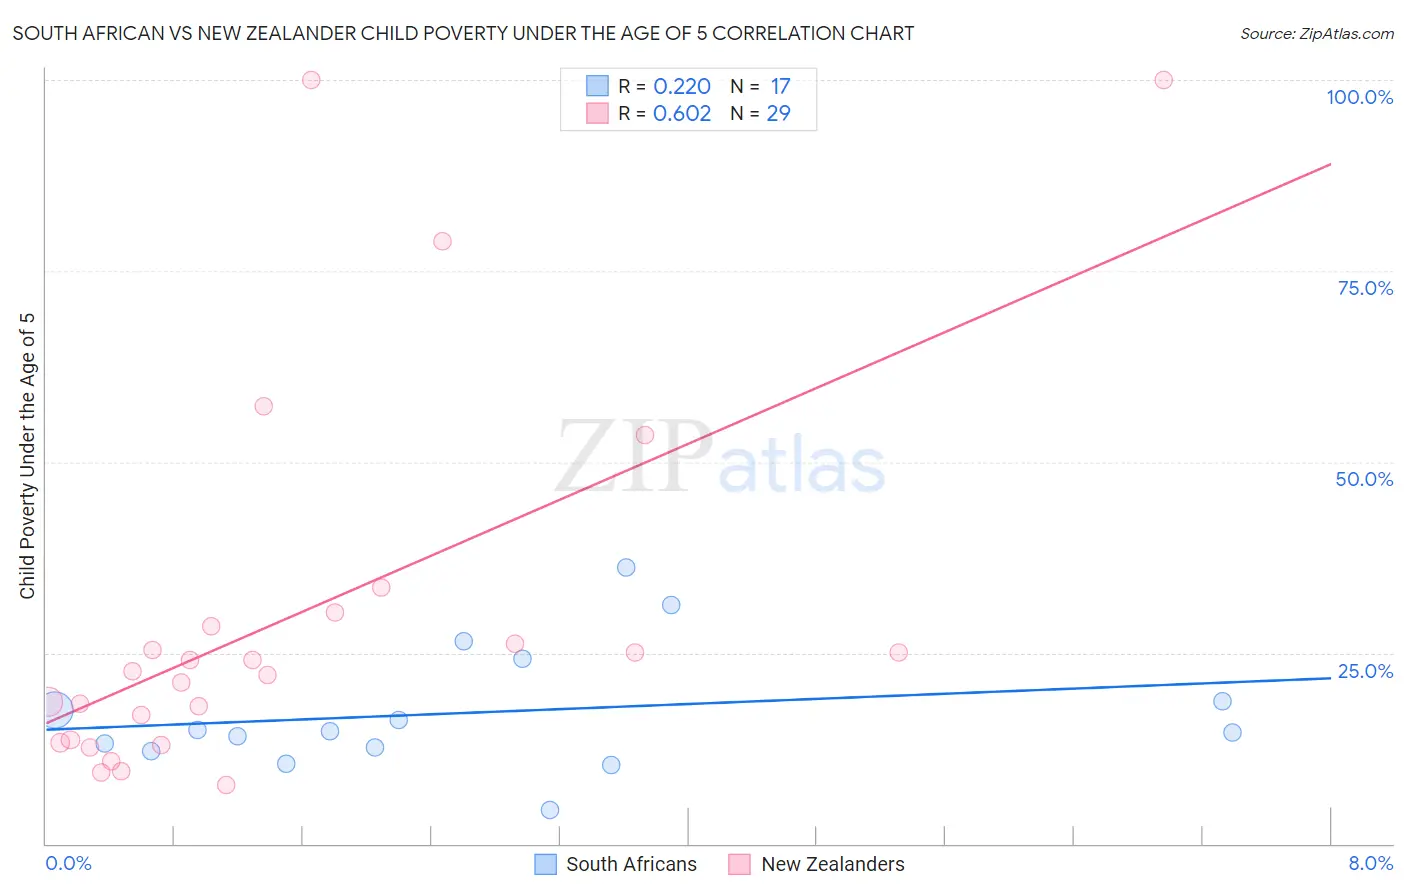 South African vs New Zealander Child Poverty Under the Age of 5